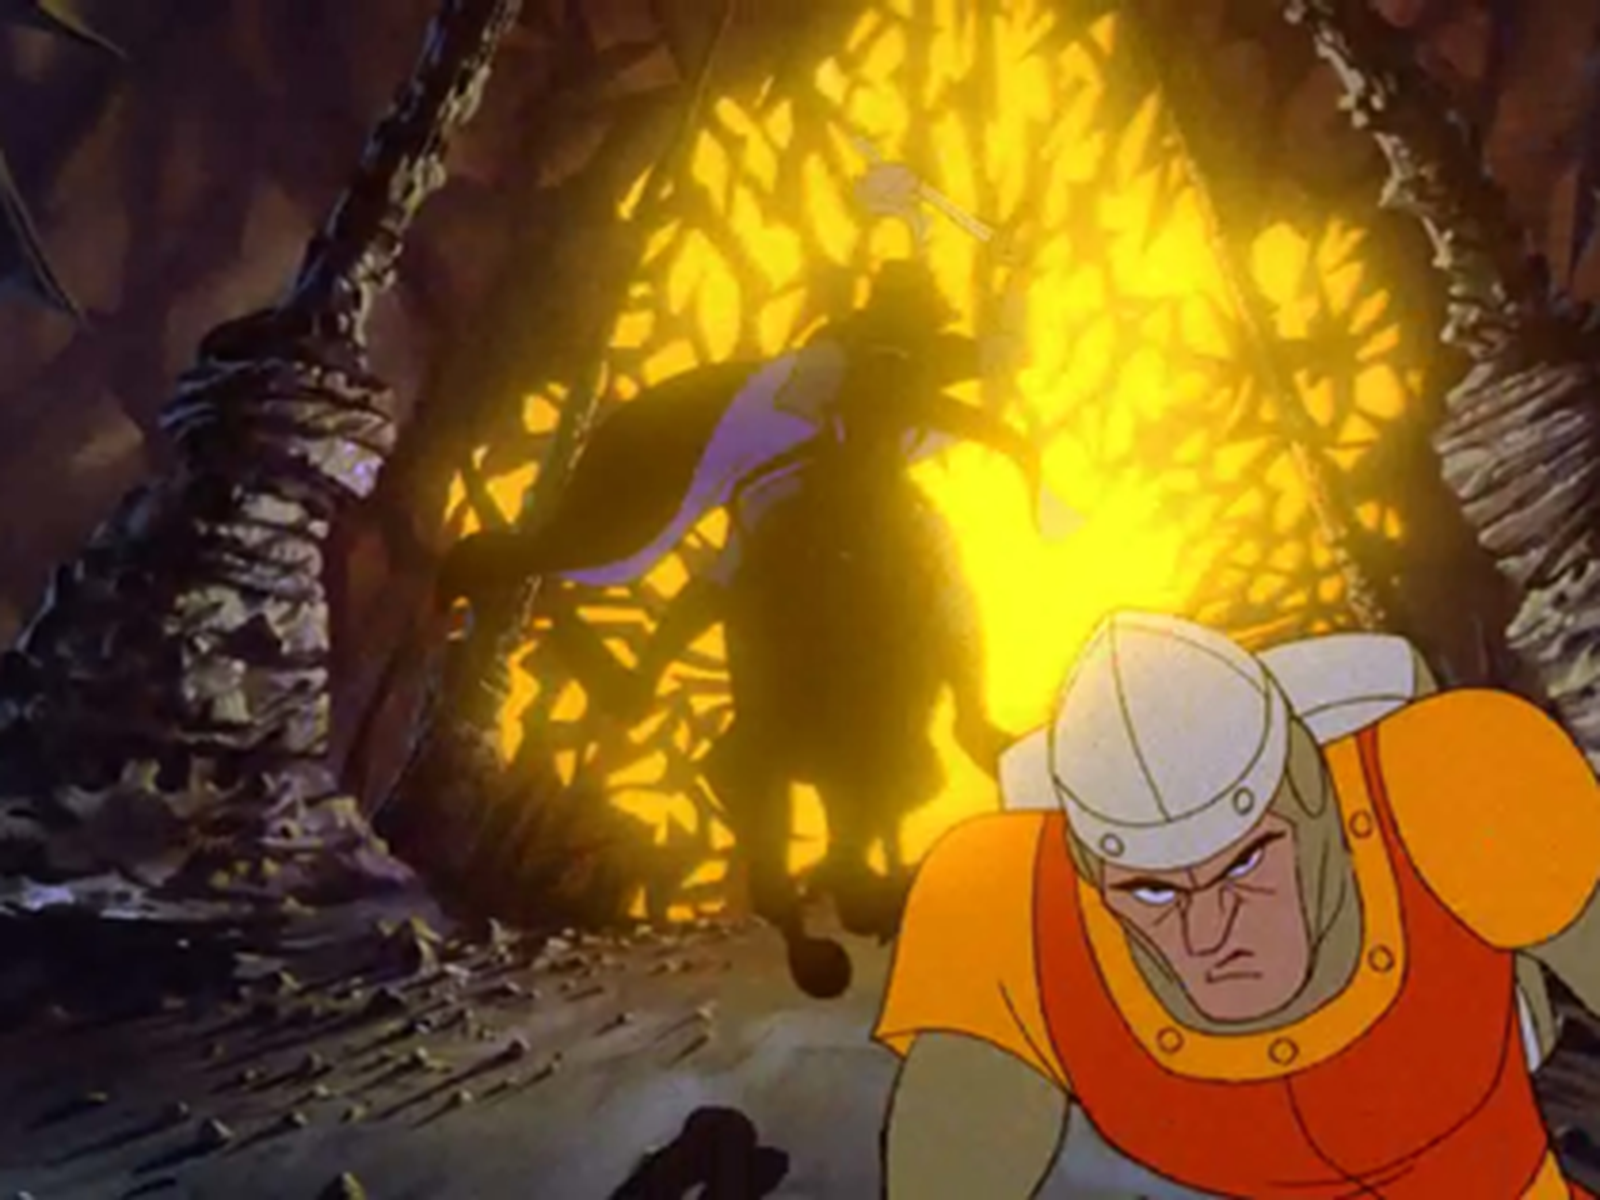 Classic Video Game Dragon S Lair Comes To Os X Macrumors